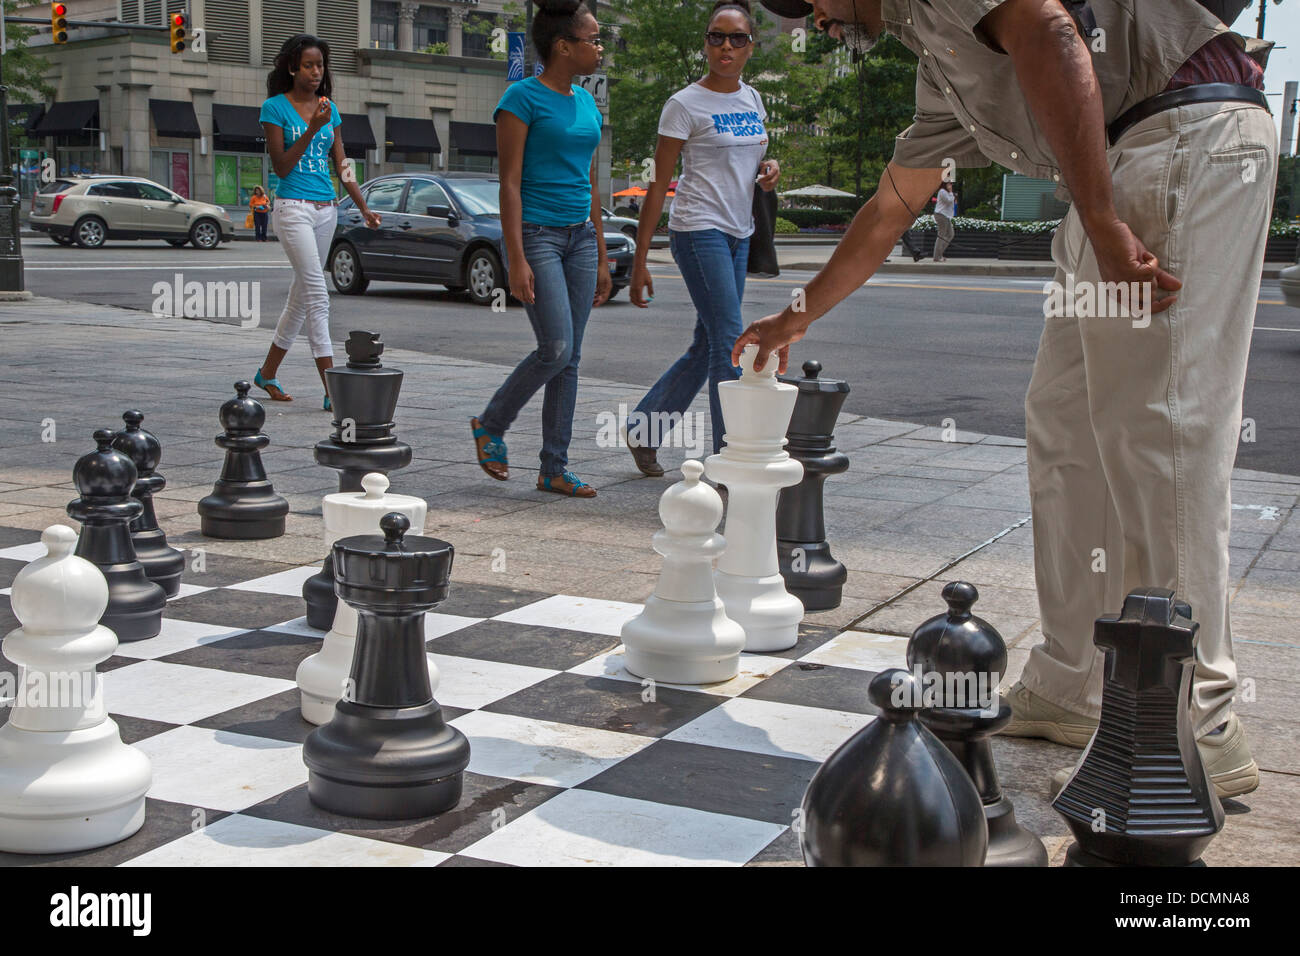 Detroit, Michigan - A man moves a piece in a sidewalk chess match in downtown Detroit. Stock Photo